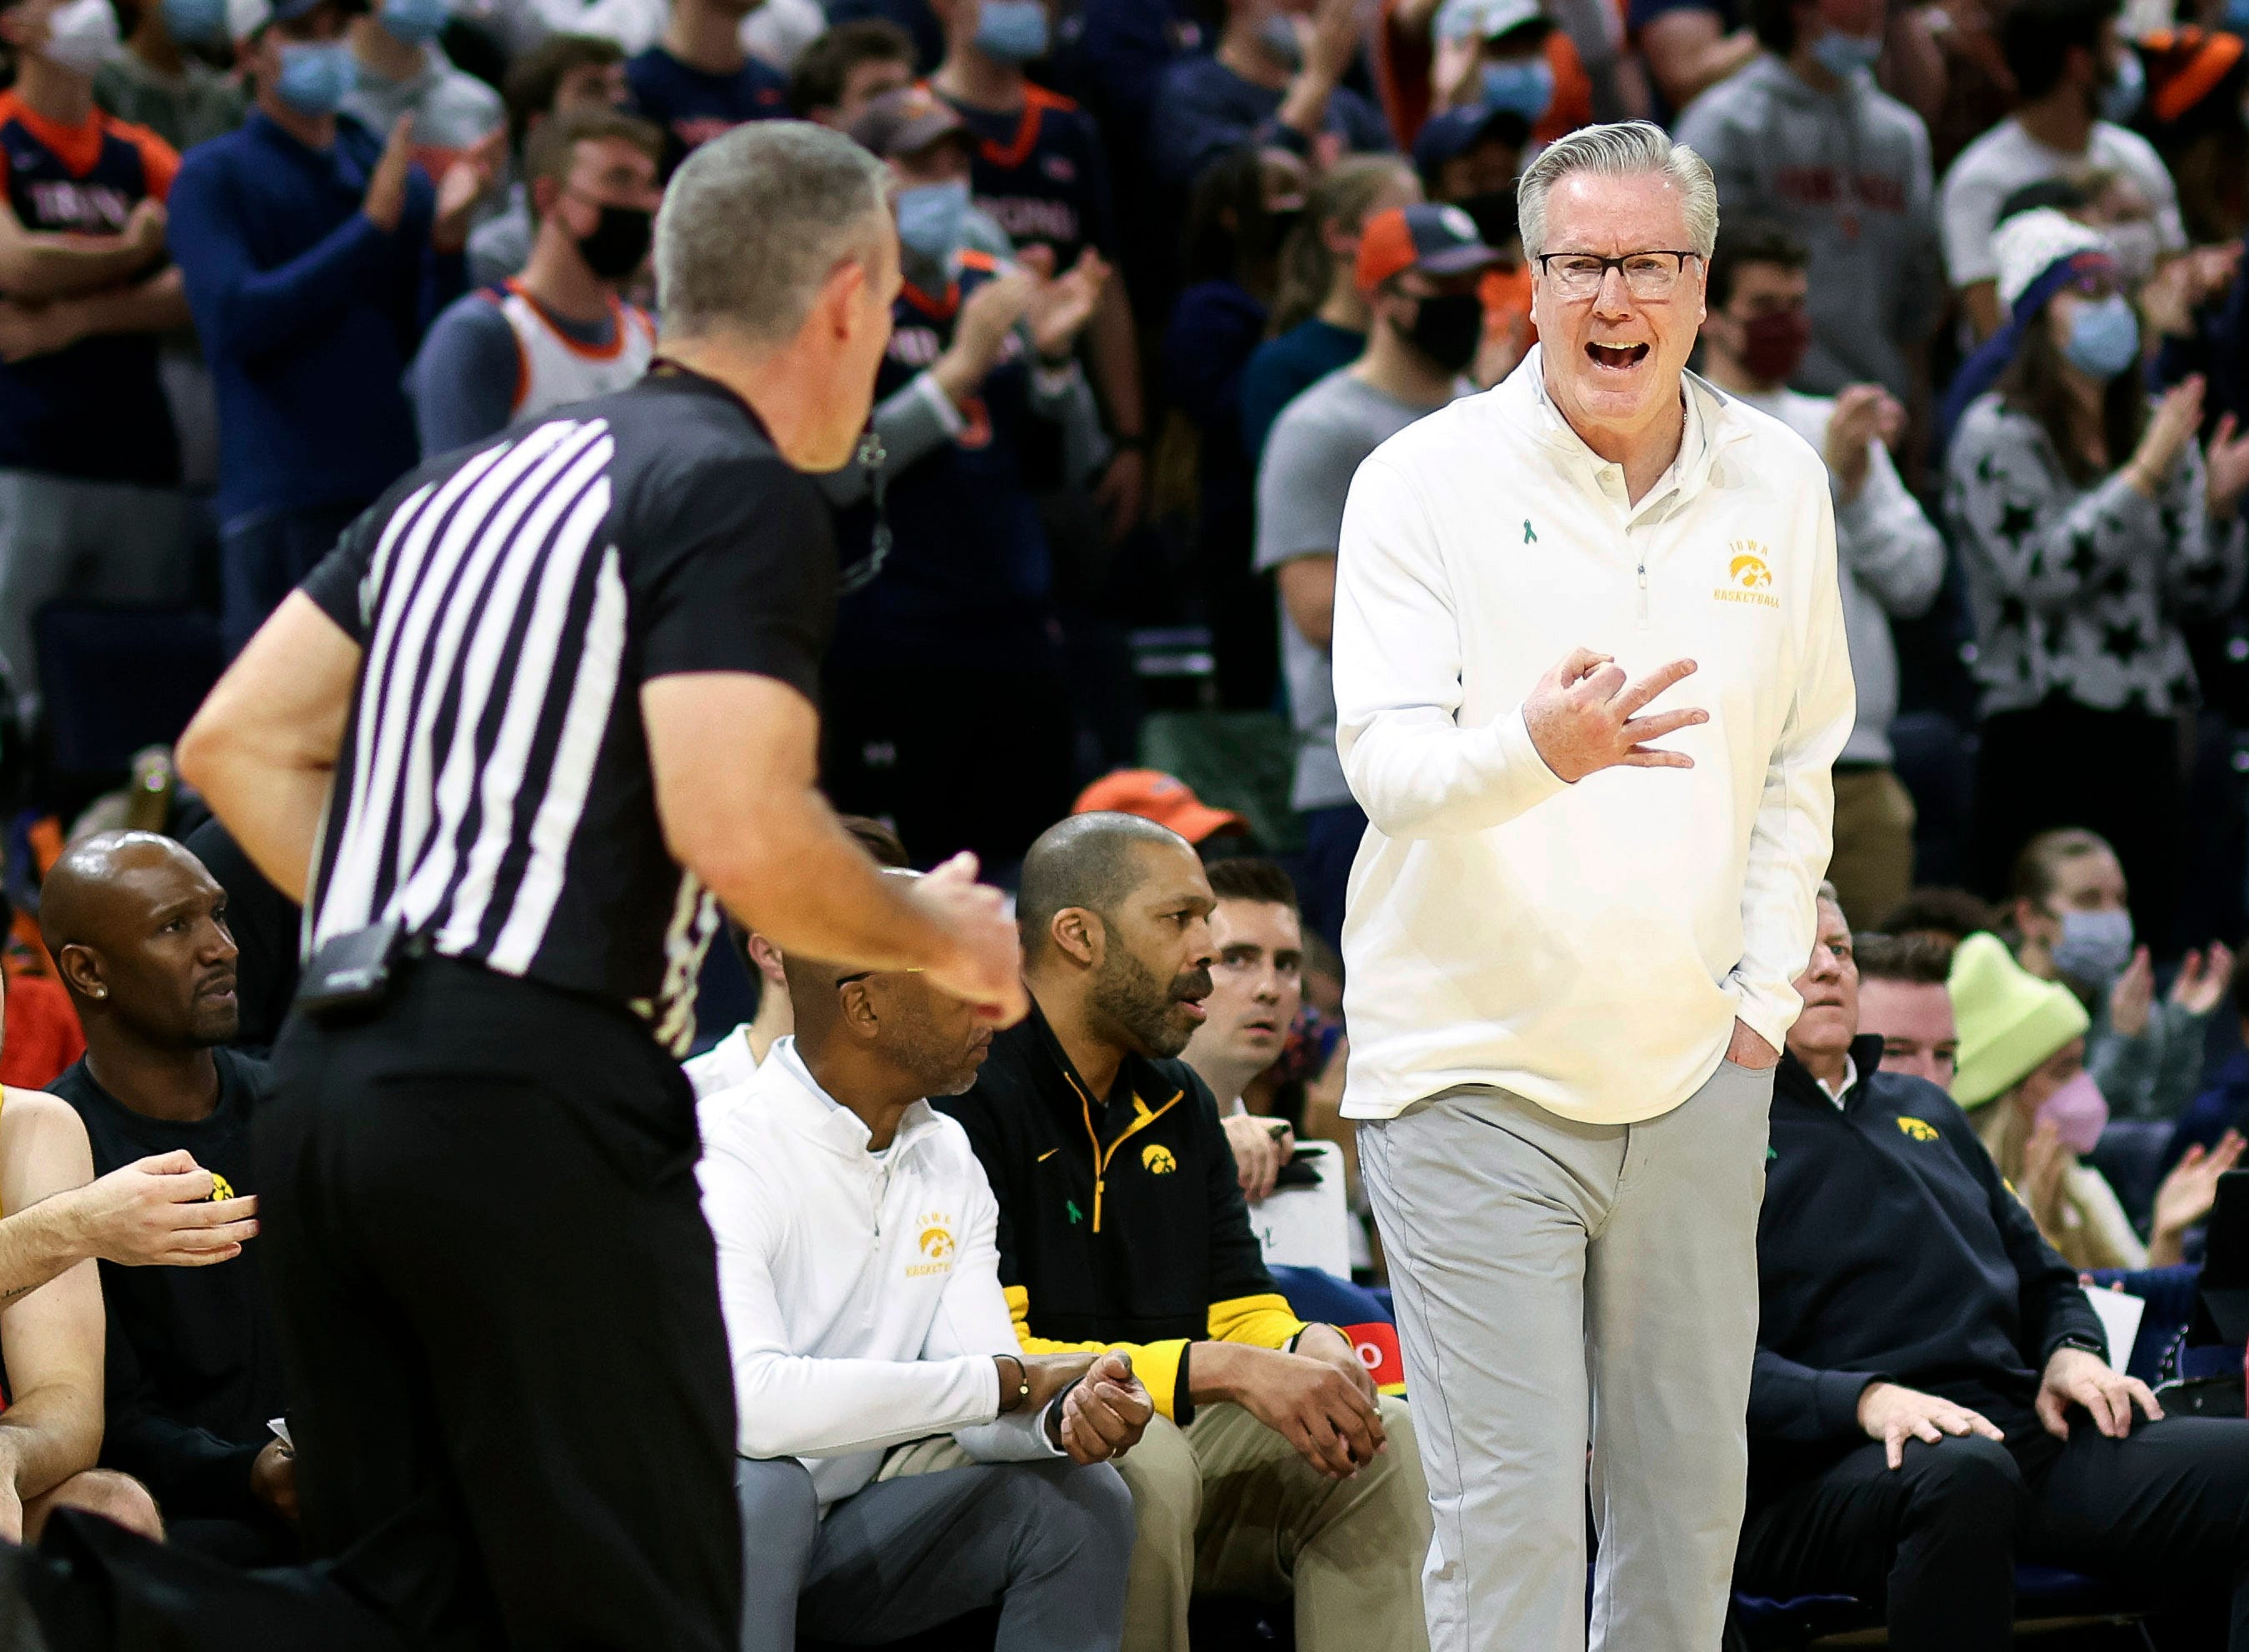 Iowa head coach Fran McCaffery reacts to a call during the first half of an NCAA college basketball game against Virginia, Monday, Nov. 29, 2021, in Charlottesville, Va.